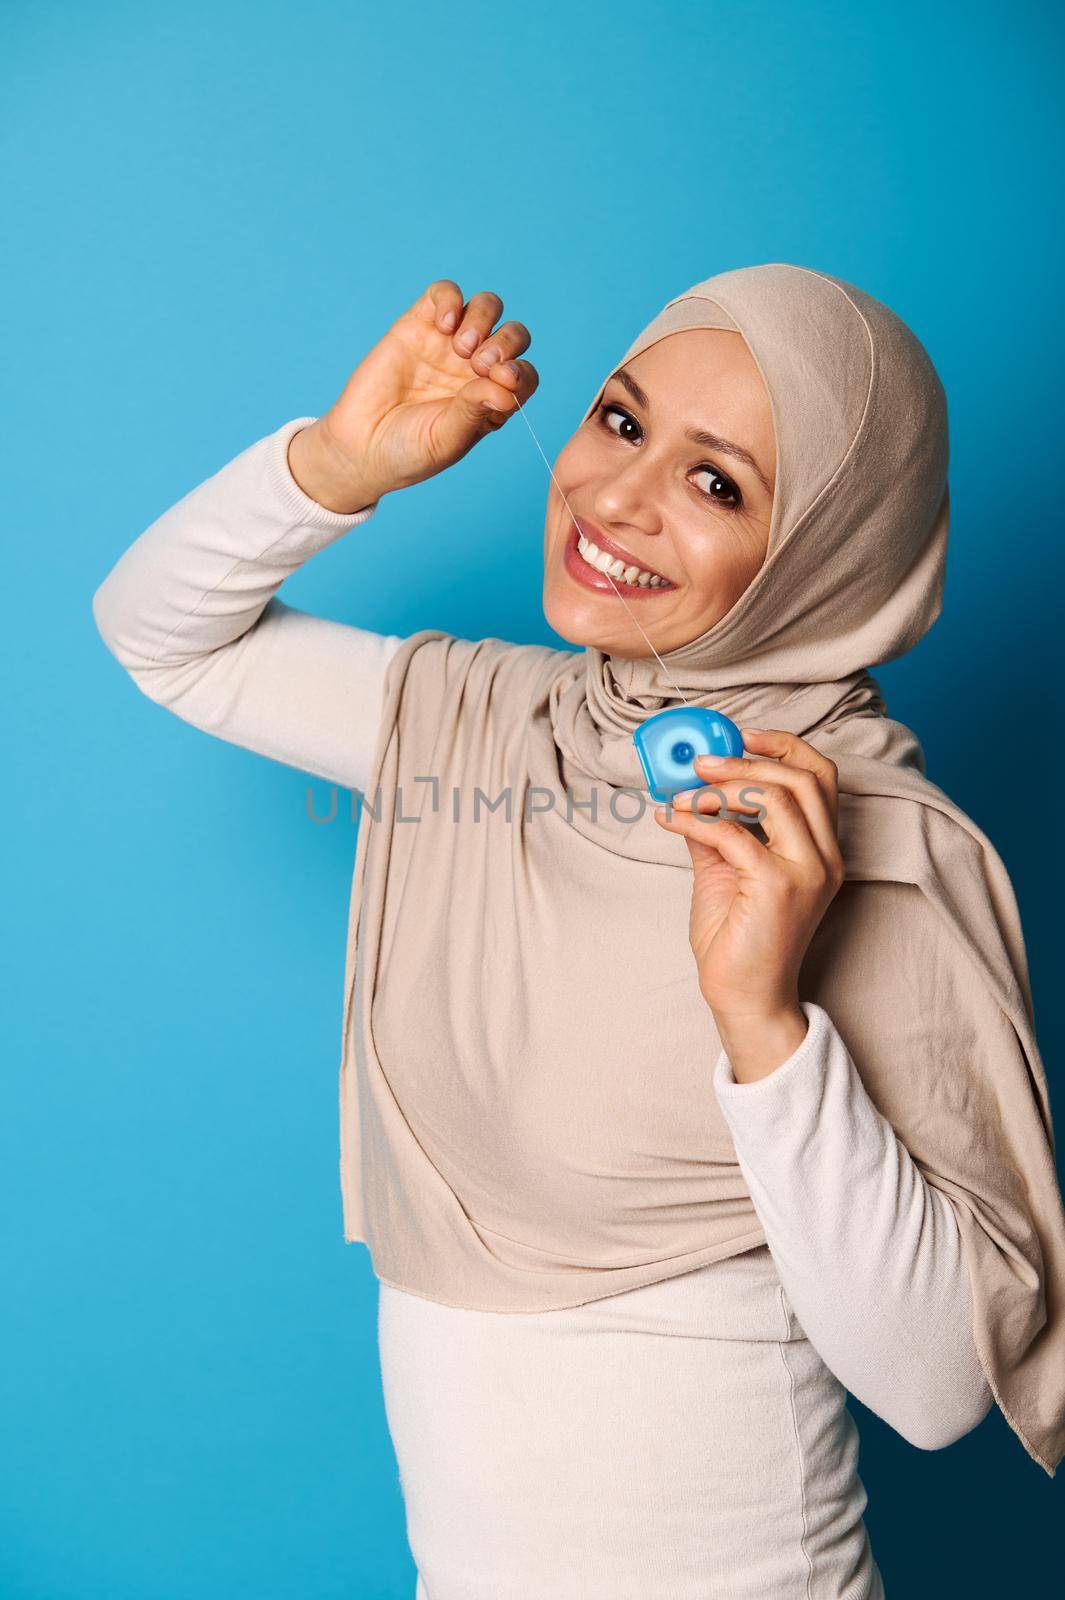 An oriental woman in a hijab smiles a toothy smile at the camera and uses a dental floss, posing against a blue background with copy space. Oral hygiene